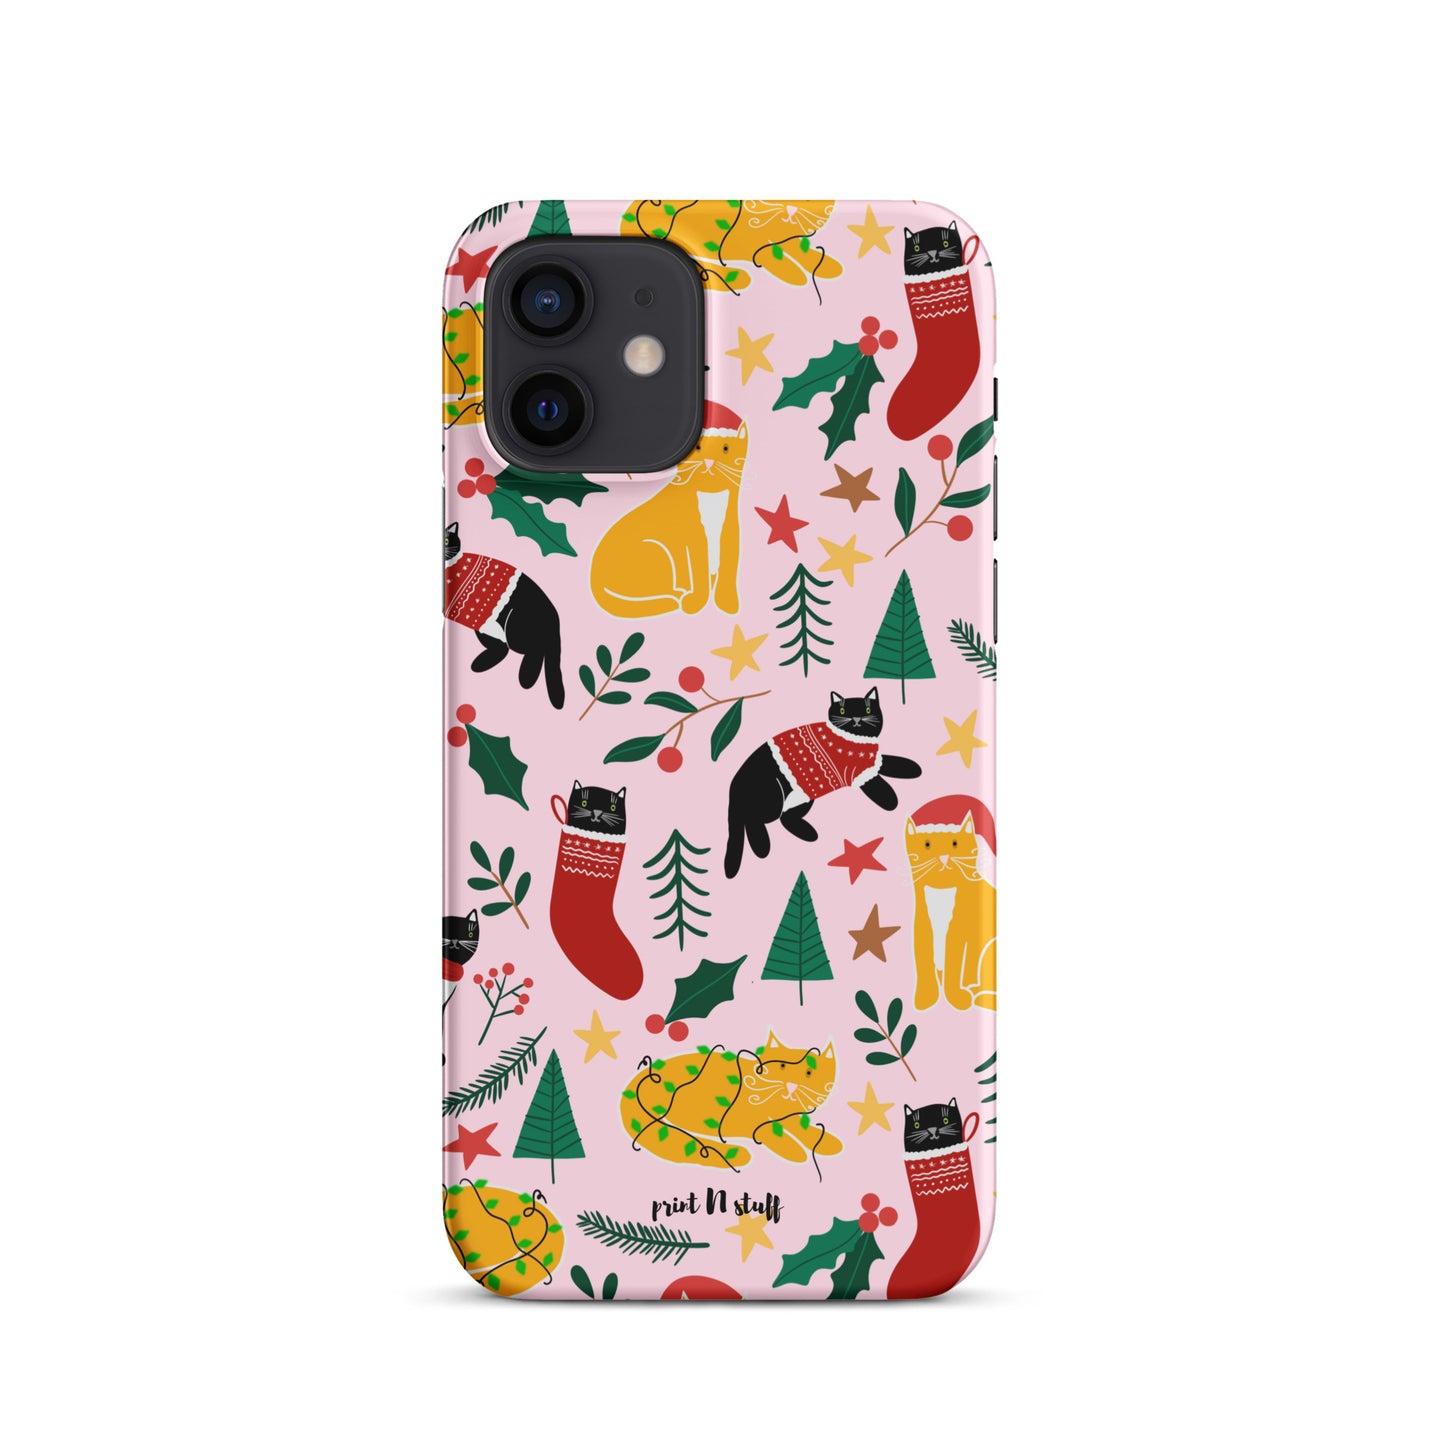 Snap case for iPhone® - Joulukissat / Christmas Cats - Phone Cases- Print N Stuff - [designed in Turku Finland]